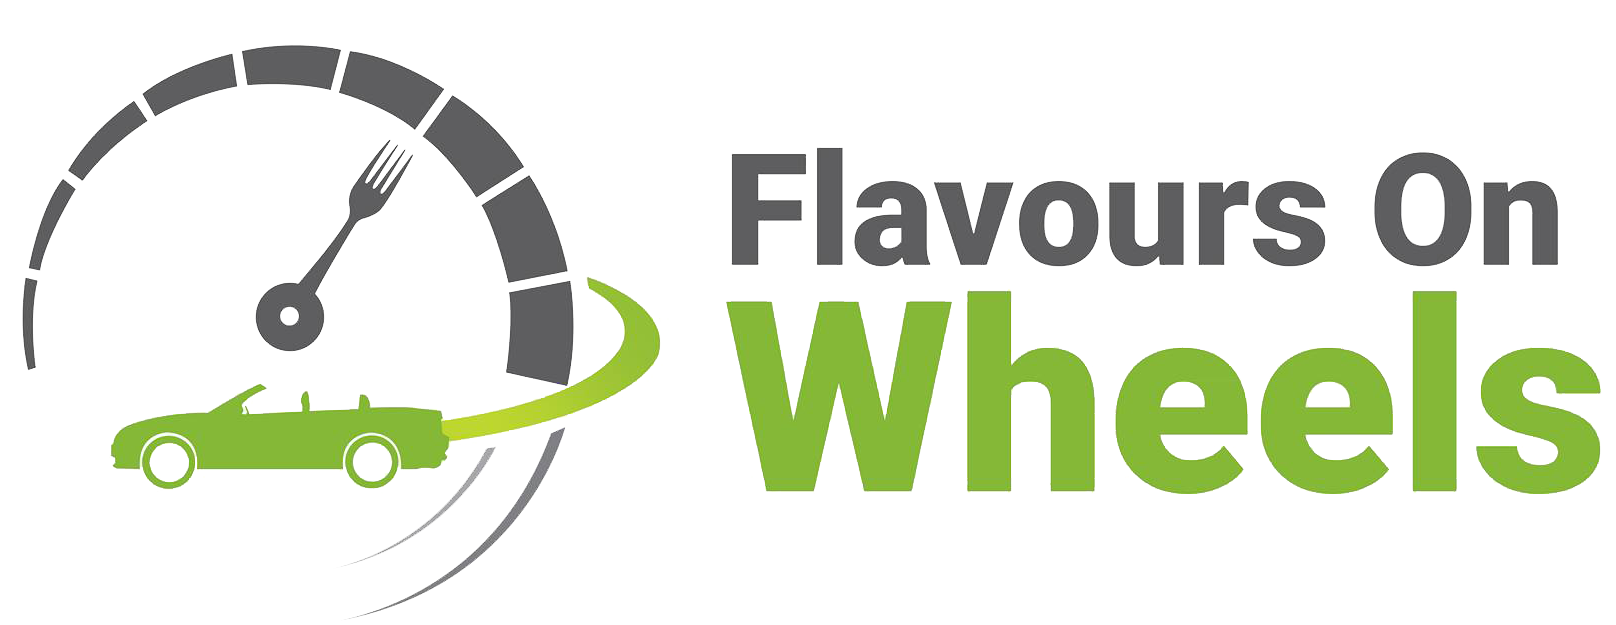 Flavours on Wheels